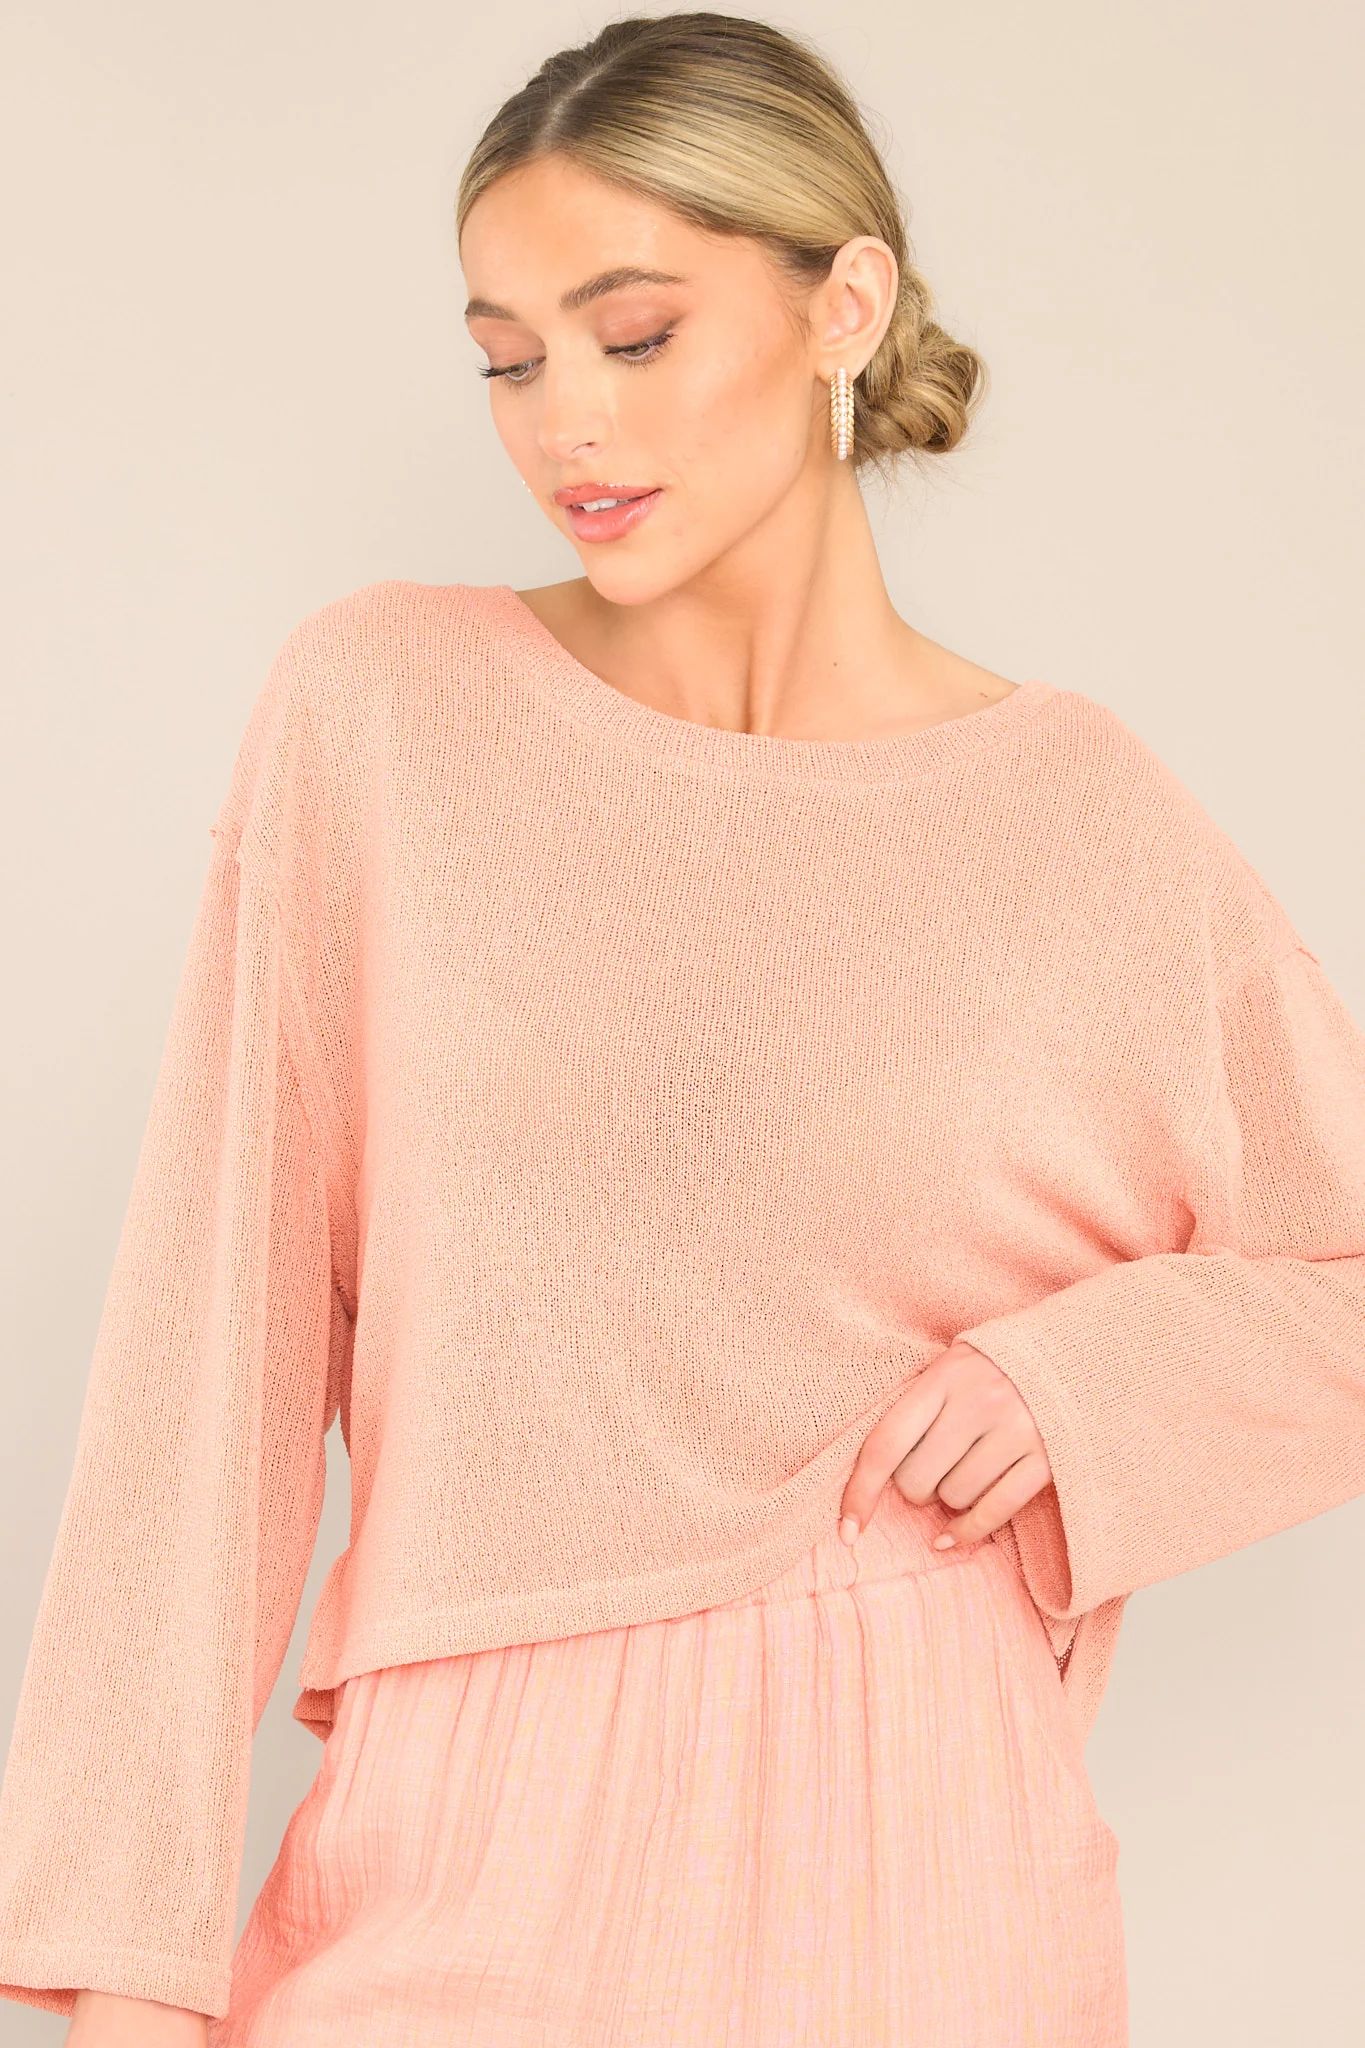 Embrace The Journey Peach Knit Top | Red Dress